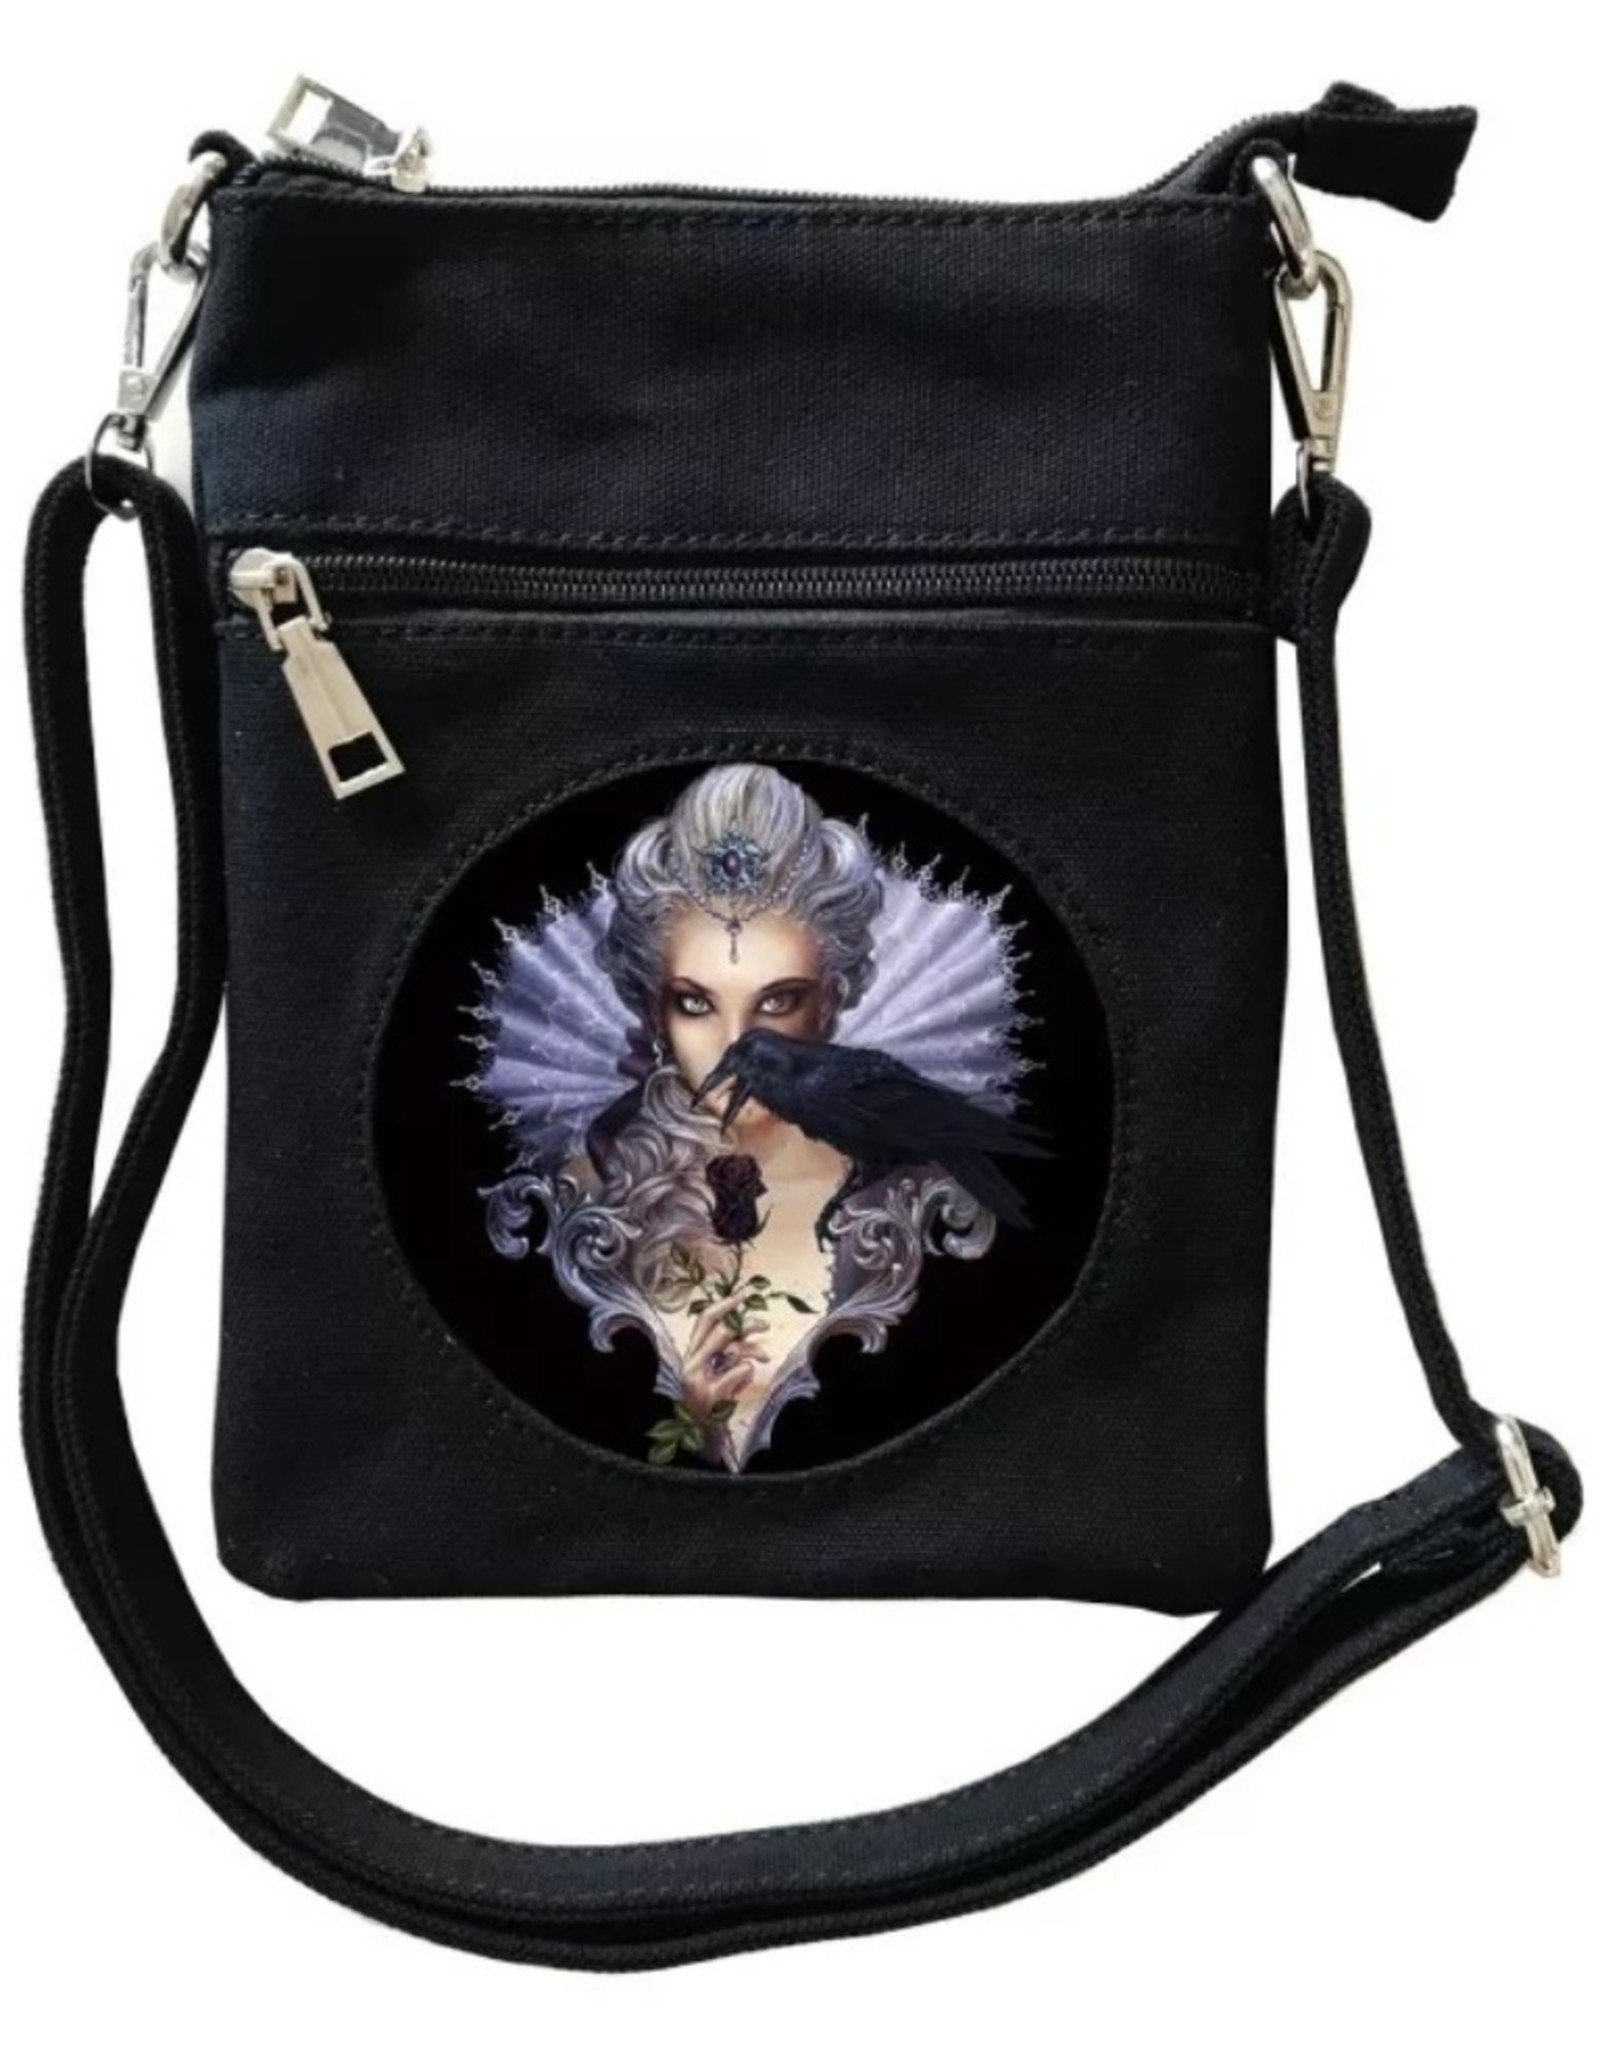 Alchemy Fantasy bags and wallets - Alchemy 3D lenticular Mini Cross-over bag Ravenous